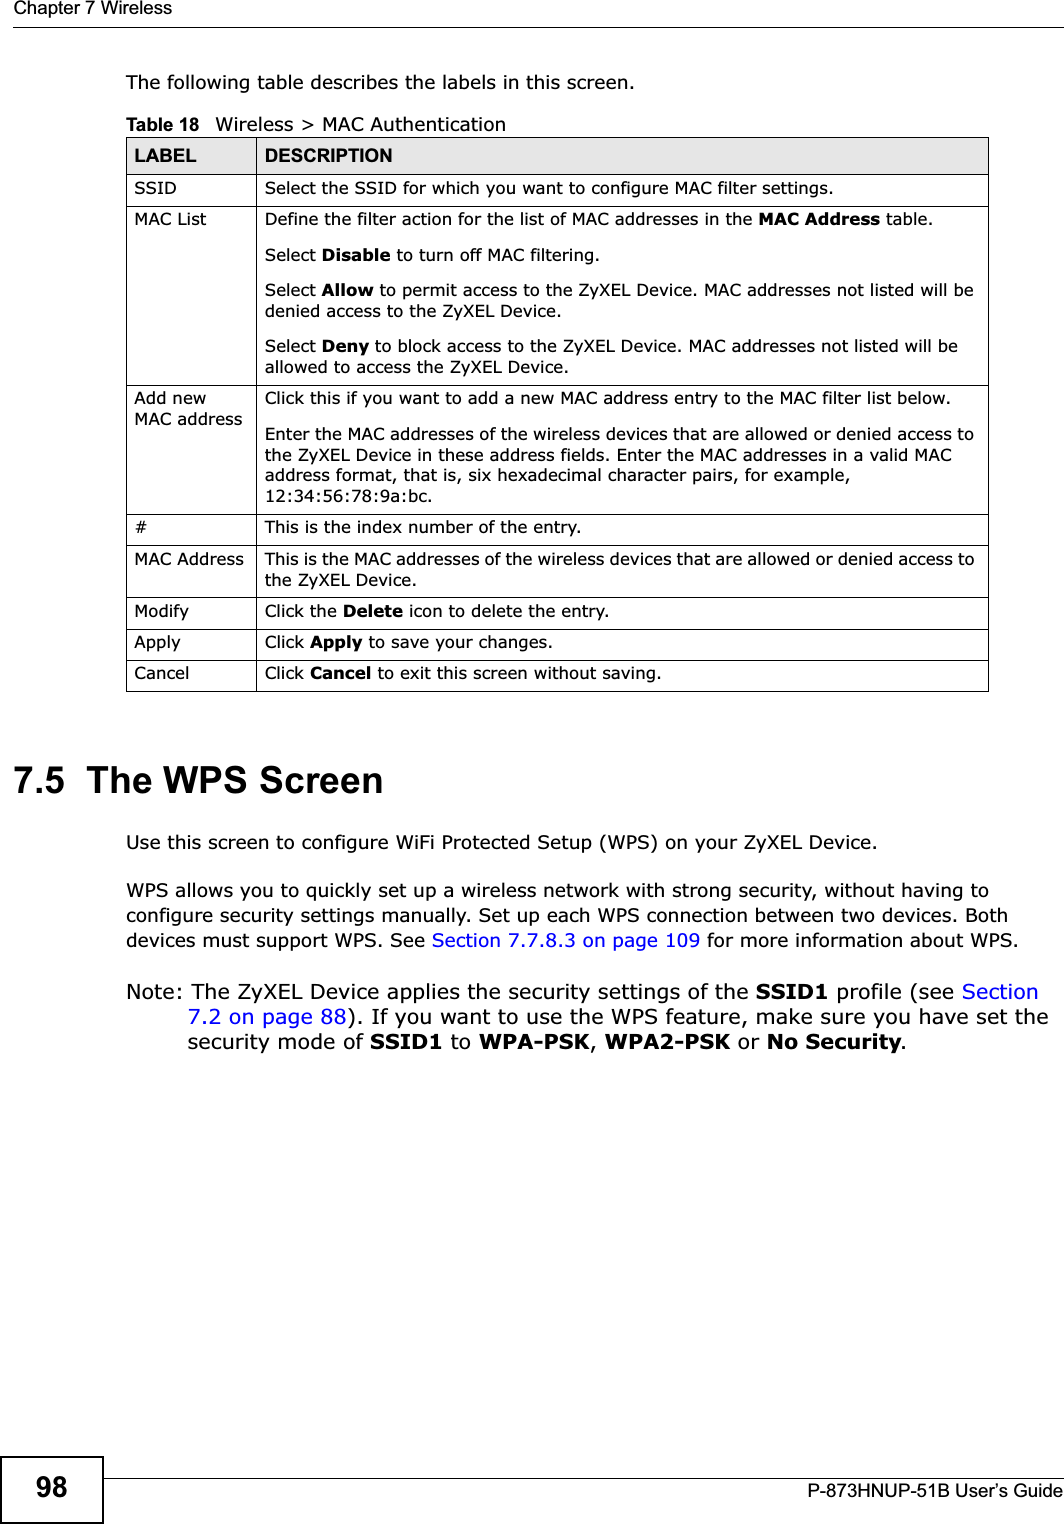 Chapter 7 WirelessP-873HNUP-51B User’s Guide98The following table describes the labels in this screen.7.5  The WPS ScreenUse this screen to configure WiFi Protected Setup (WPS) on your ZyXEL Device.WPS allows you to quickly set up a wireless network with strong security, without having to configure security settings manually. Set up each WPS connection between two devices. Both devices must support WPS. See Section 7.7.8.3 on page 109 for more information about WPS.Note: The ZyXEL Device applies the security settings of the SSID1 profile (see Section 7.2 on page 88). If you want to use the WPS feature, make sure you have set the security mode of SSID1 to WPA-PSK,WPA2-PSK or No Security.Table 18   Wireless &gt; MAC AuthenticationLABEL DESCRIPTIONSSID Select the SSID for which you want to configure MAC filter settings.MAC List Define the filter action for the list of MAC addresses in the MAC Address table. Select Disable to turn off MAC filtering.Select Allow to permit access to the ZyXEL Device. MAC addresses not listed will be denied access to the ZyXEL Device. Select Deny to block access to the ZyXEL Device. MAC addresses not listed will be allowed to access the ZyXEL Device. Add new MAC addressClick this if you want to add a new MAC address entry to the MAC filter list below.Enter the MAC addresses of the wireless devices that are allowed or denied access to the ZyXEL Device in these address fields. Enter the MAC addresses in a valid MAC address format, that is, six hexadecimal character pairs, for example, 12:34:56:78:9a:bc.#This is the index number of the entry.MAC Address This is the MAC addresses of the wireless devices that are allowed or denied access to the ZyXEL Device.Modify Click the Delete icon to delete the entry.Apply Click Apply to save your changes.Cancel Click Cancel to exit this screen without saving.